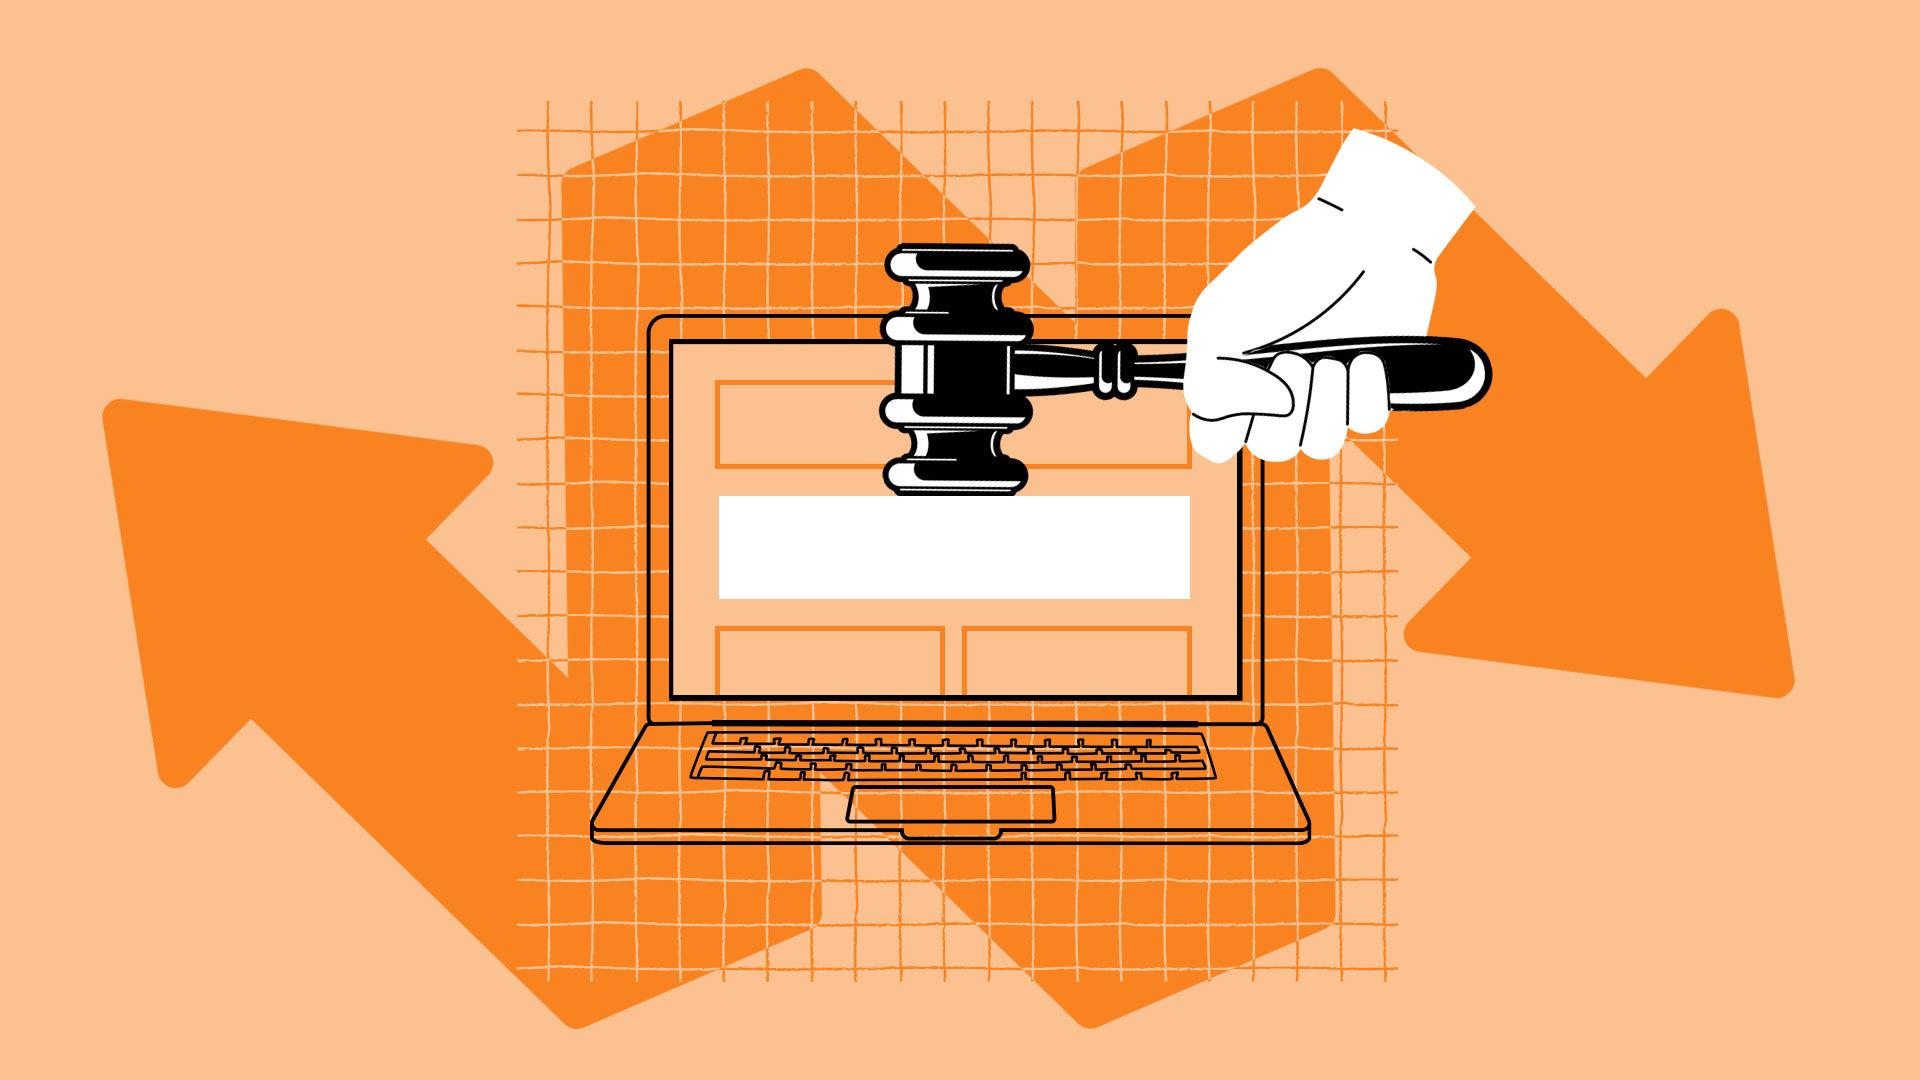 Orange graphic with a hand over a laptop holding a gavel. Behind the laptop is a bar graph and a double-ended arrow.